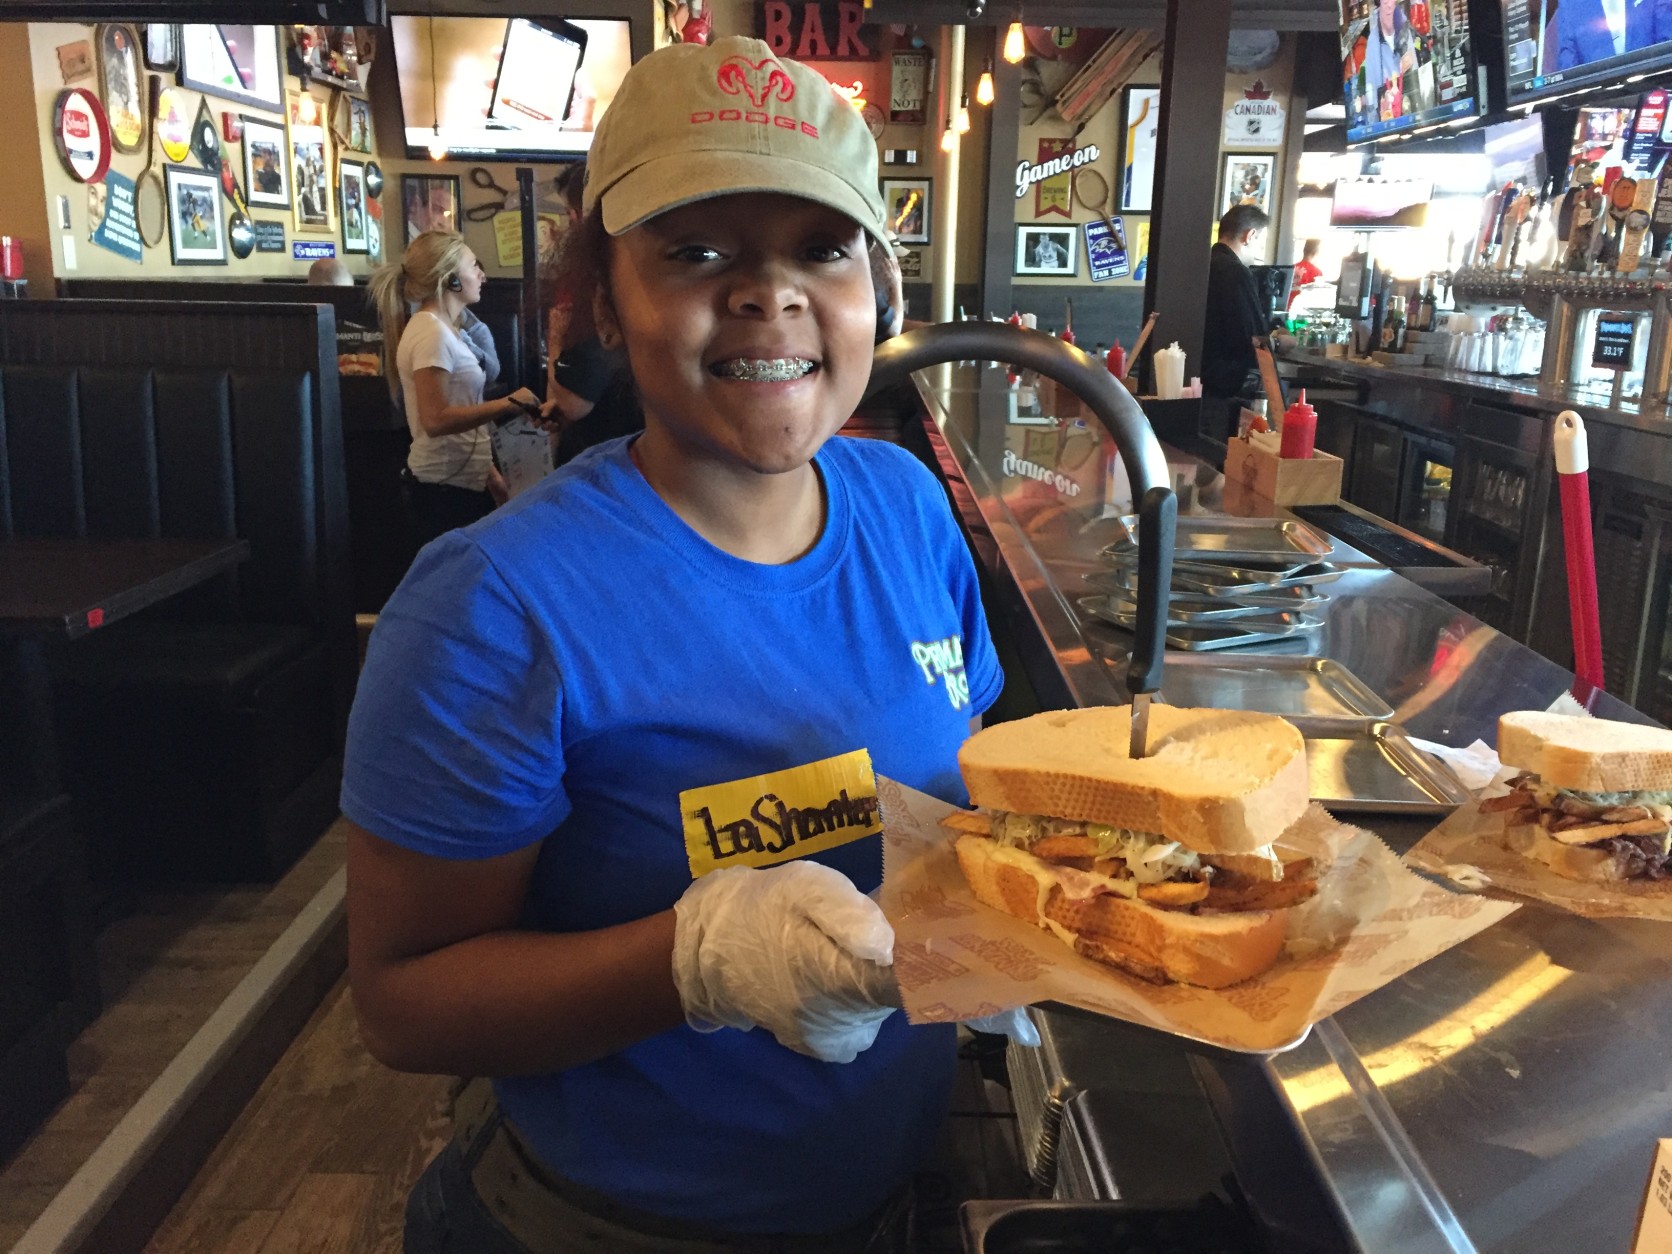 A server happily shows off a famous Primanti Bros. sandwich about to be delivered to a hungry customer. (WTOP/Michelle Basch)